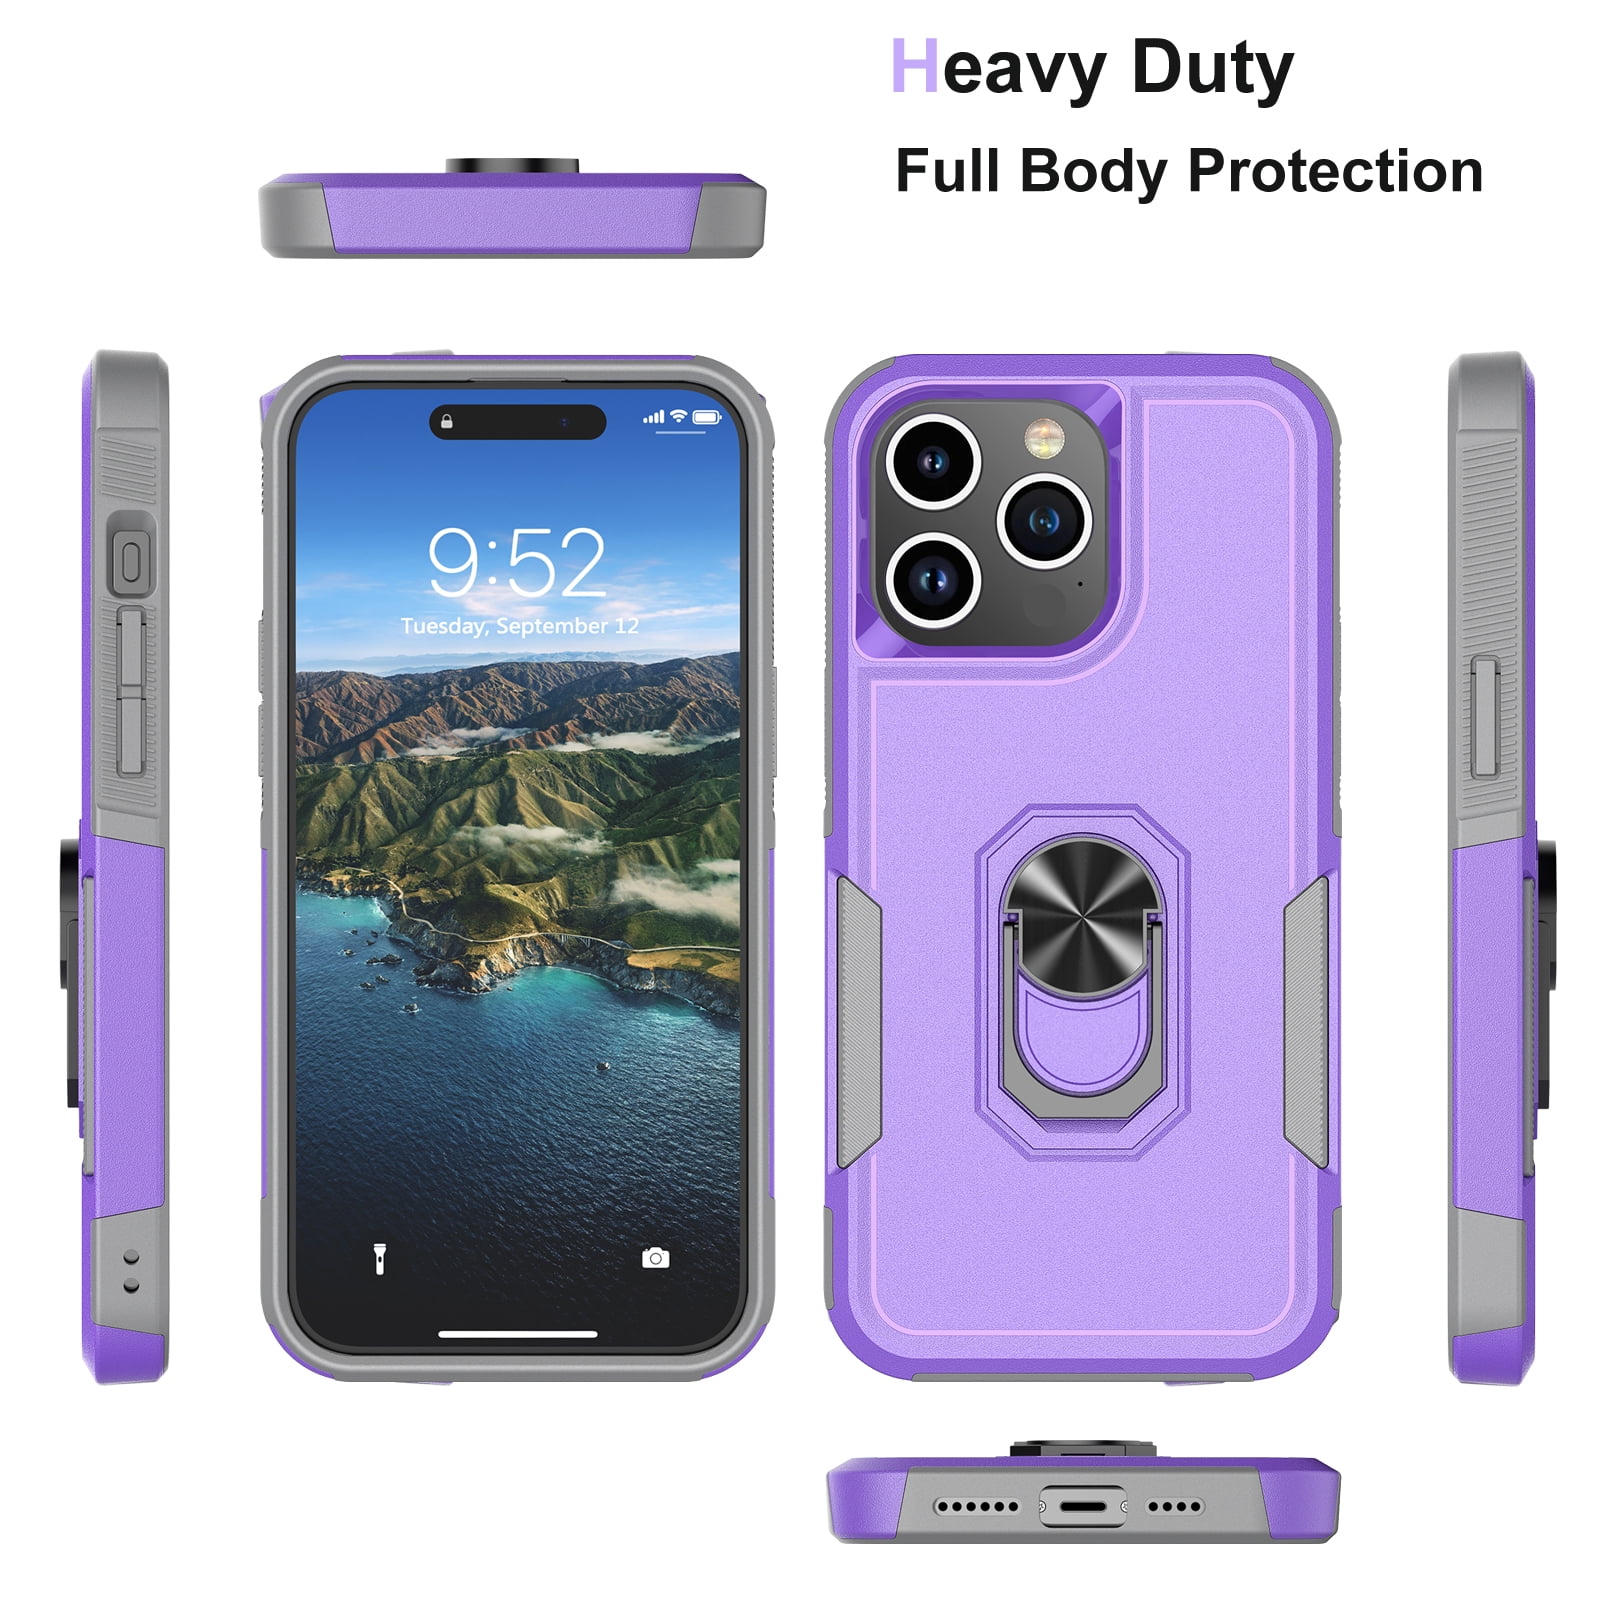  WOLLONY Compatible with iPhone 15 Pro Max Square Case, Luxury  Elegant Phone Case with Kickstand Ring Stand for Women Girls Soft TPU Metal  Shockproof Protective Cover for iPhone 15 Pro Max